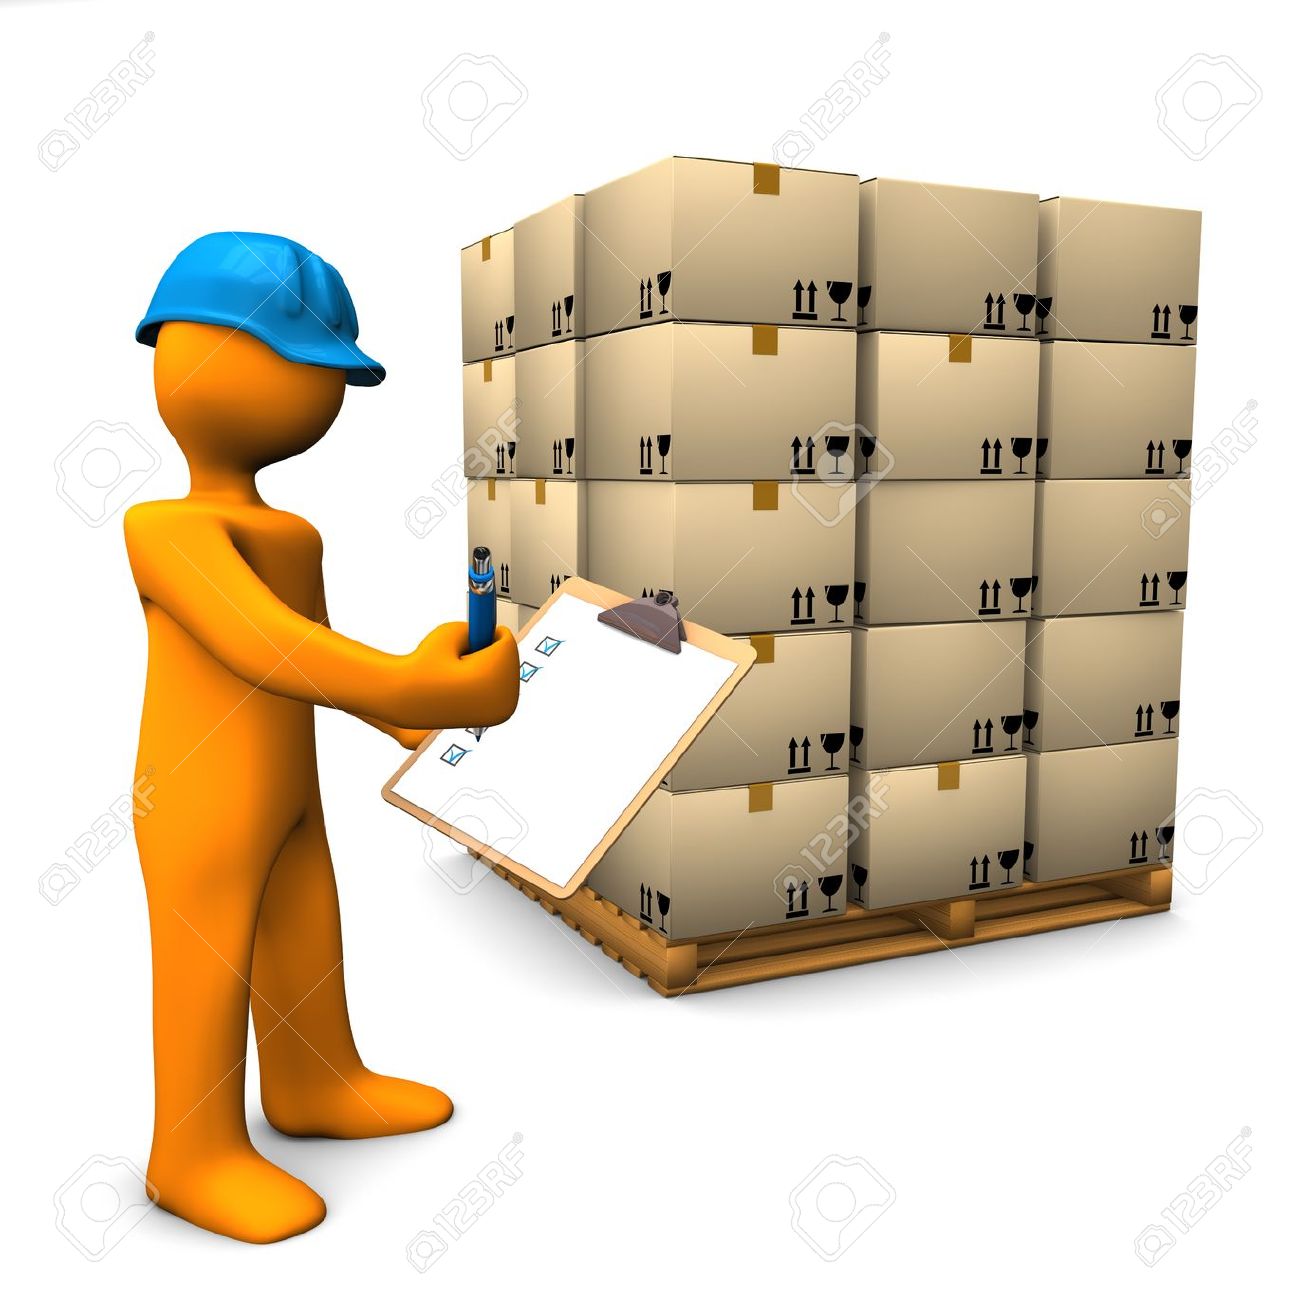 Package Stock Photos and Images - 123RF